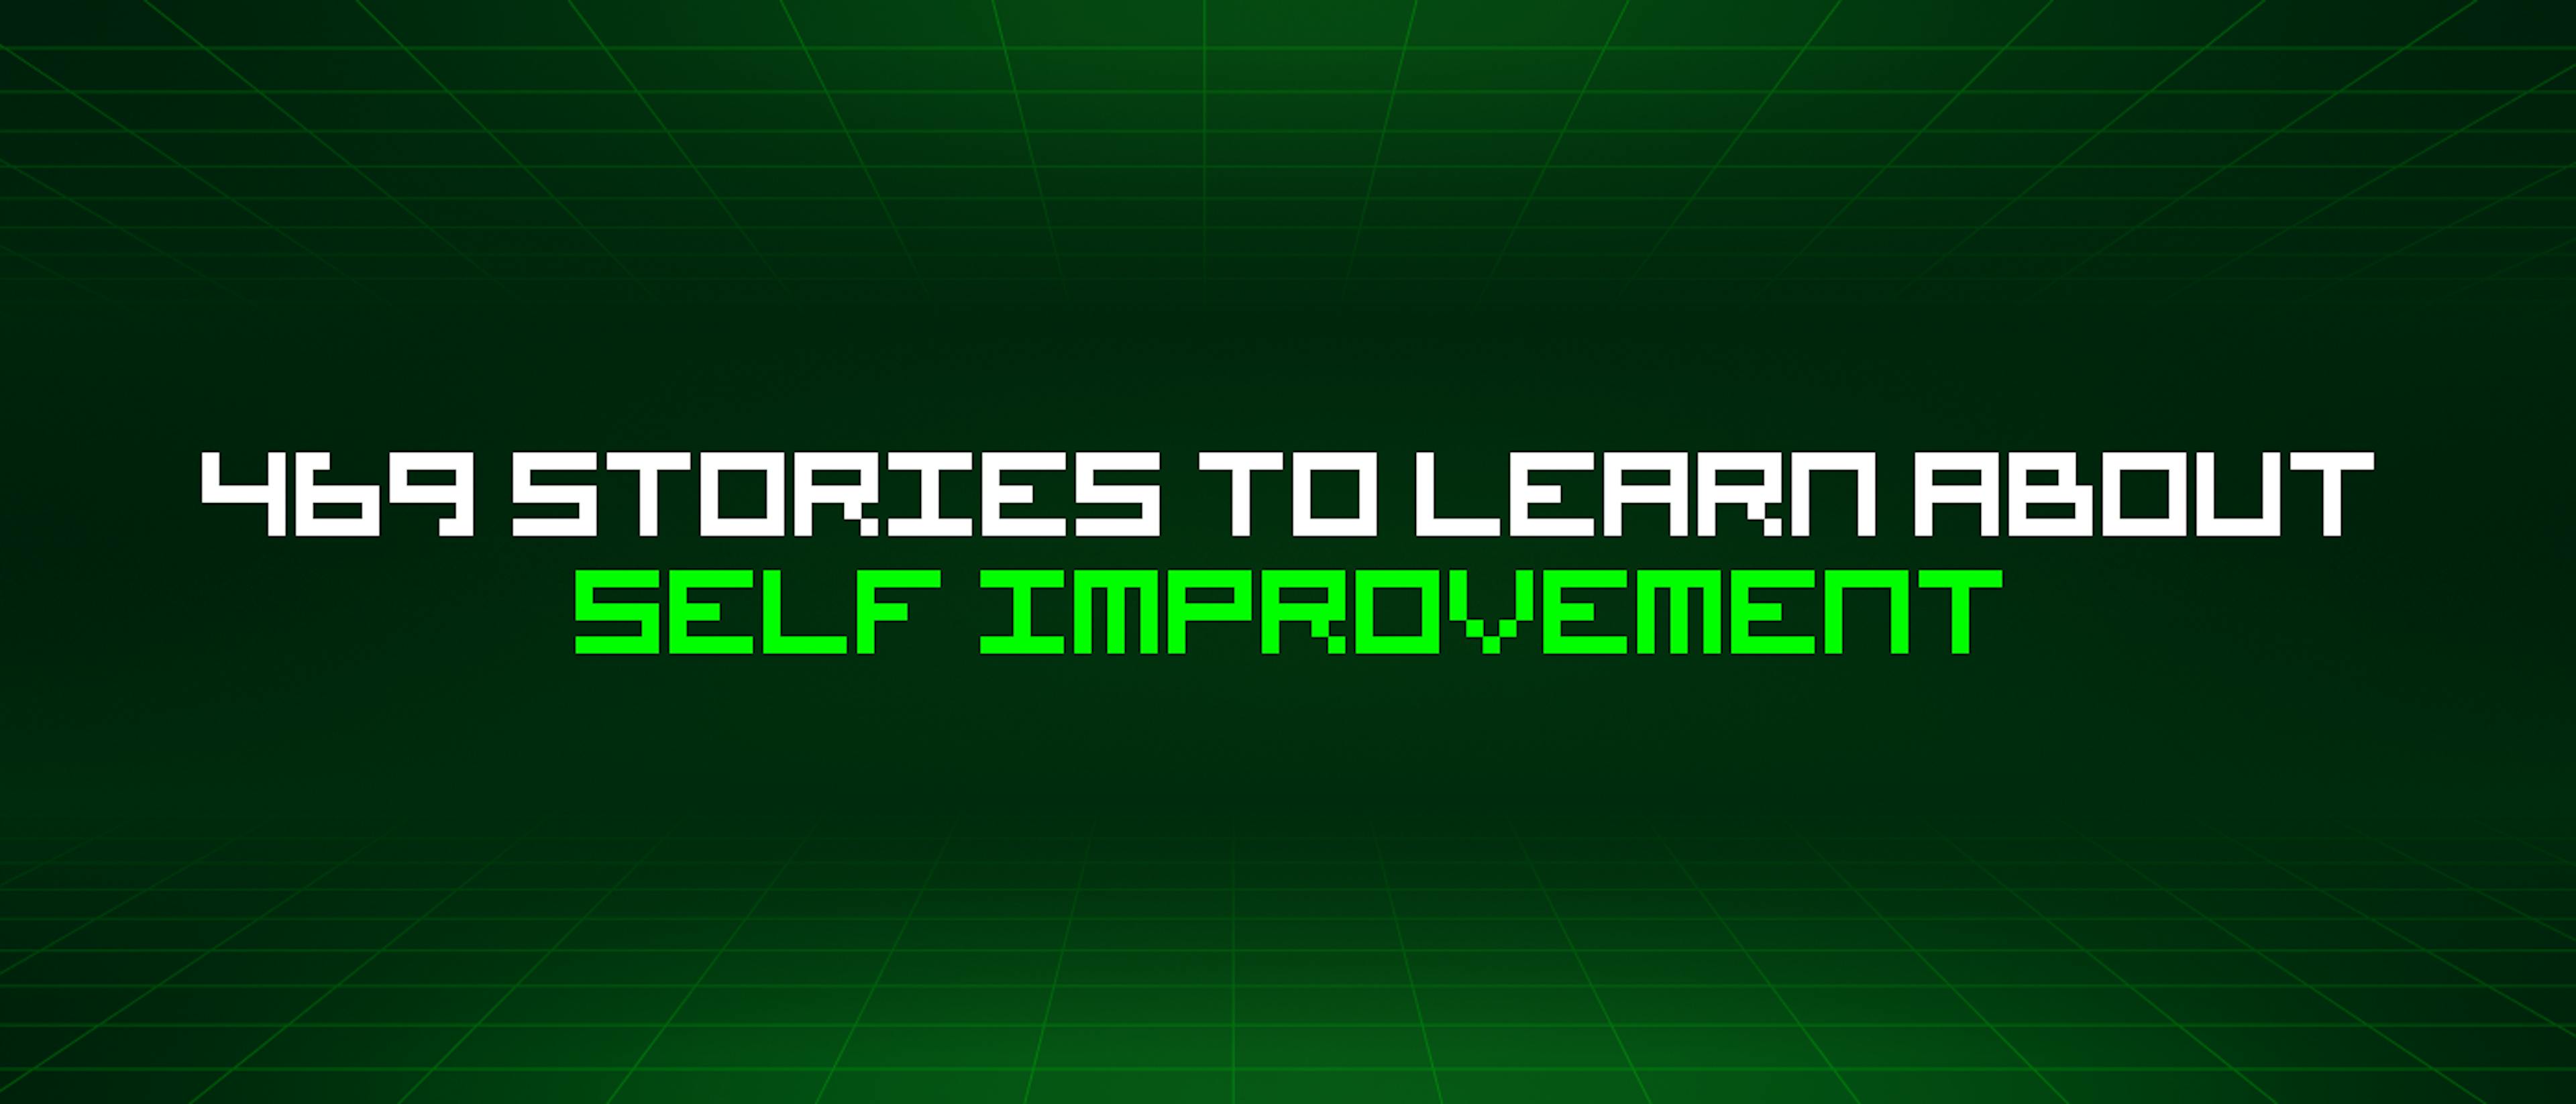 featured image - 469 Stories To Learn About Self Improvement